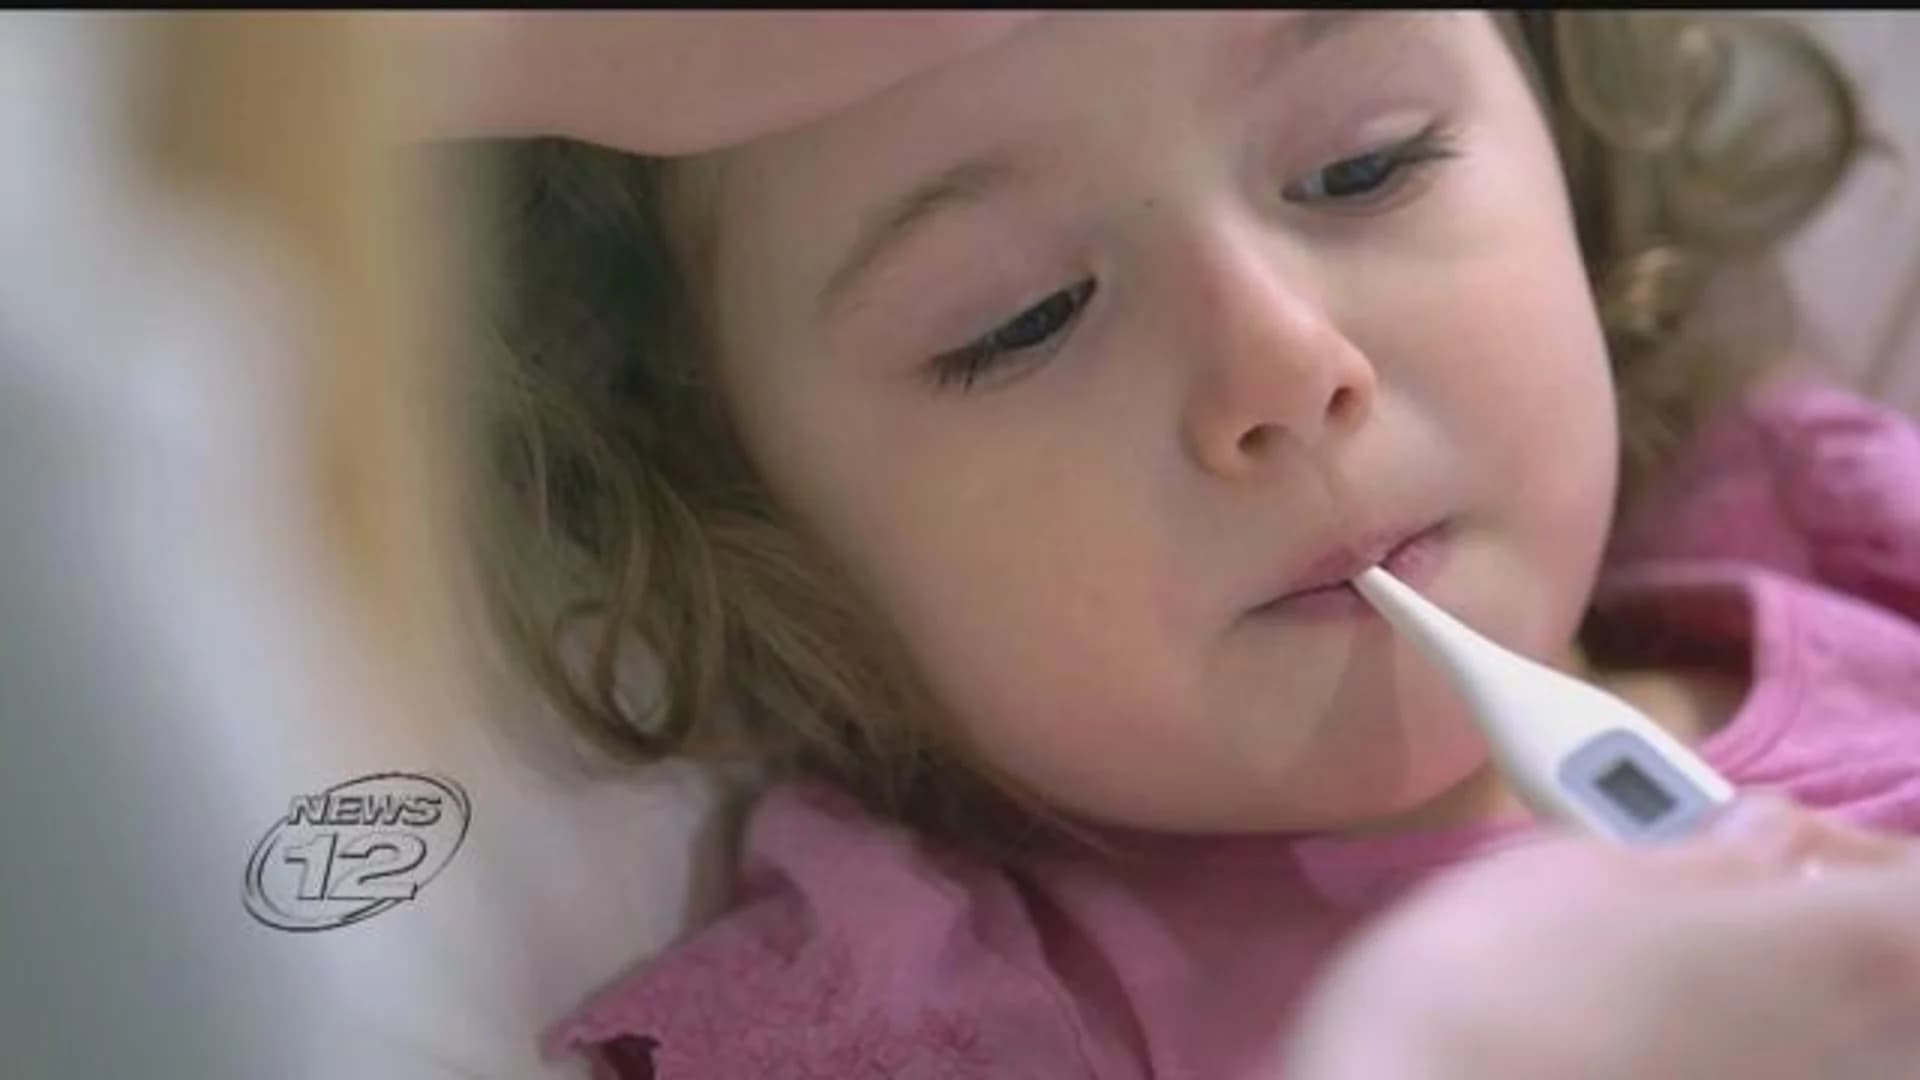 CDC: Flu vaccine working better than expected